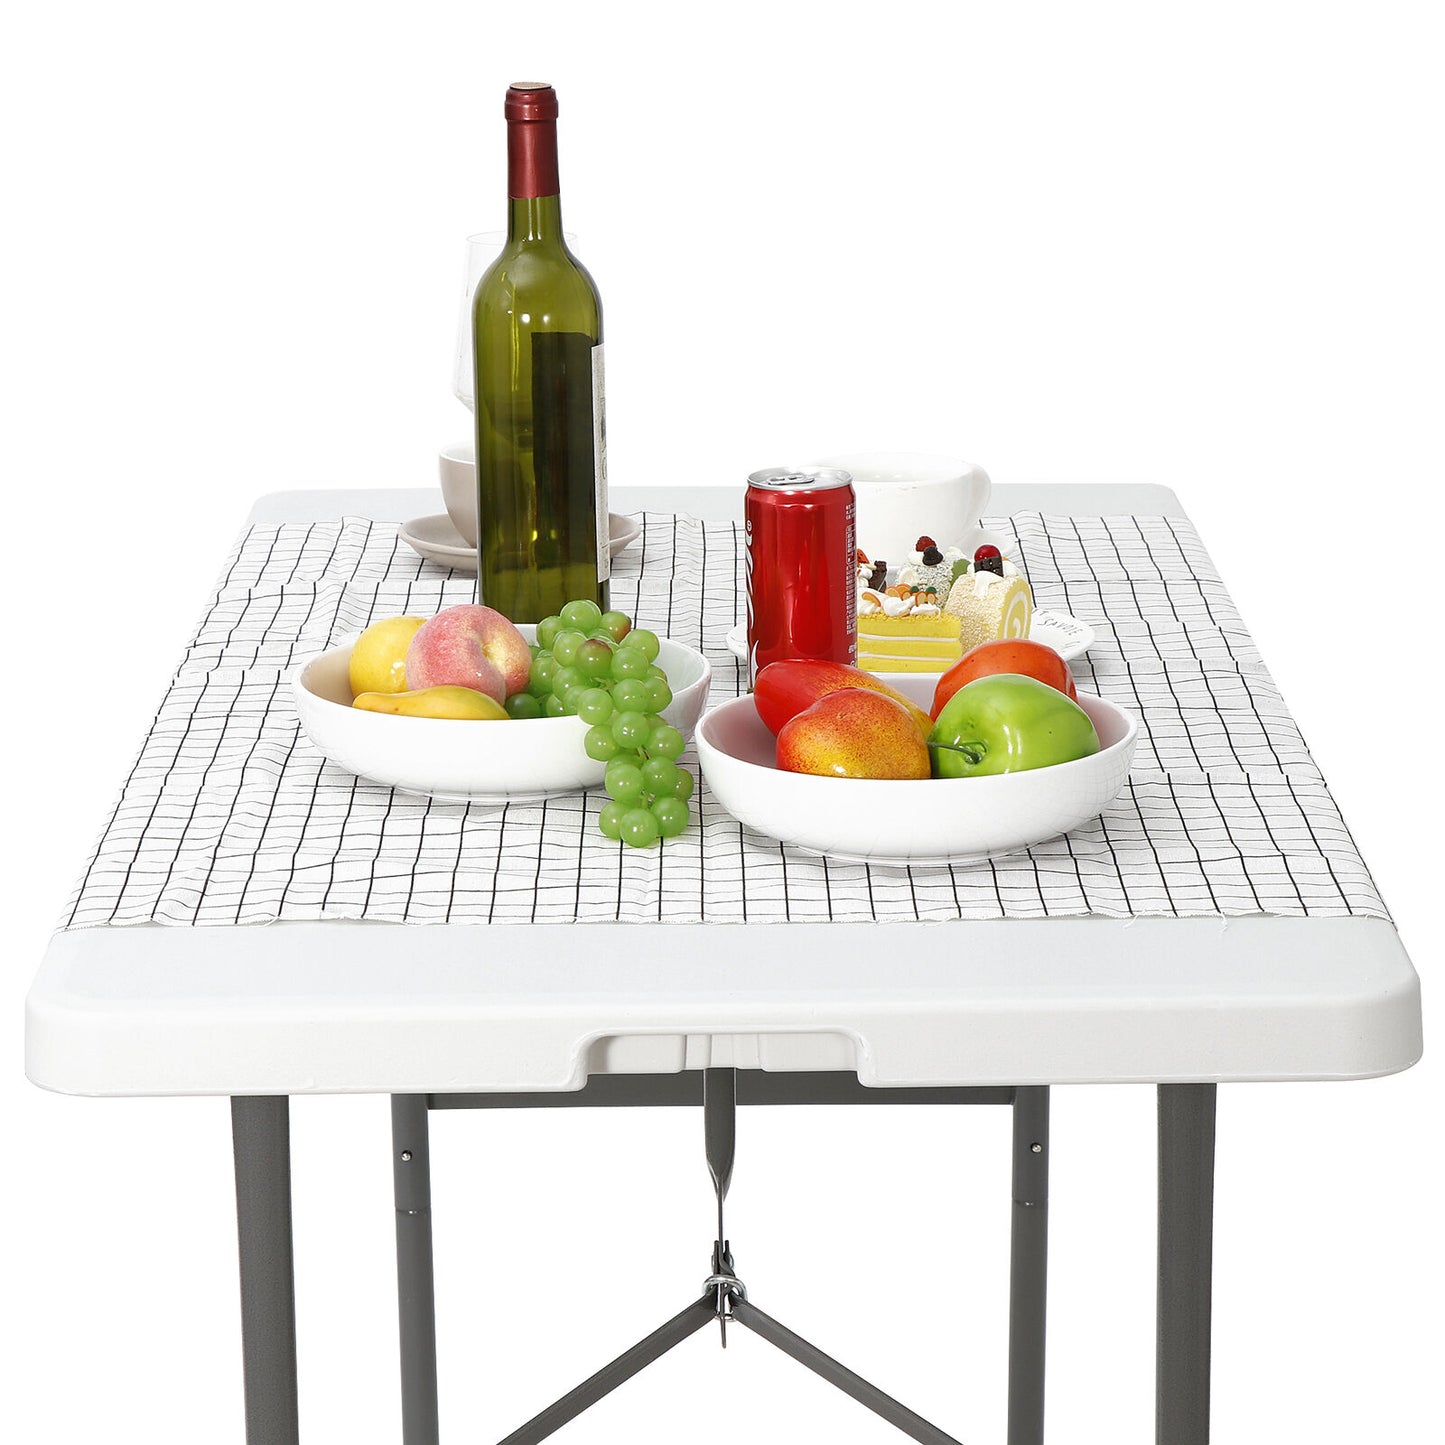 4FT Plastic Folding Table Fold-in-Half Picnic Camping Table with Carrying Handle